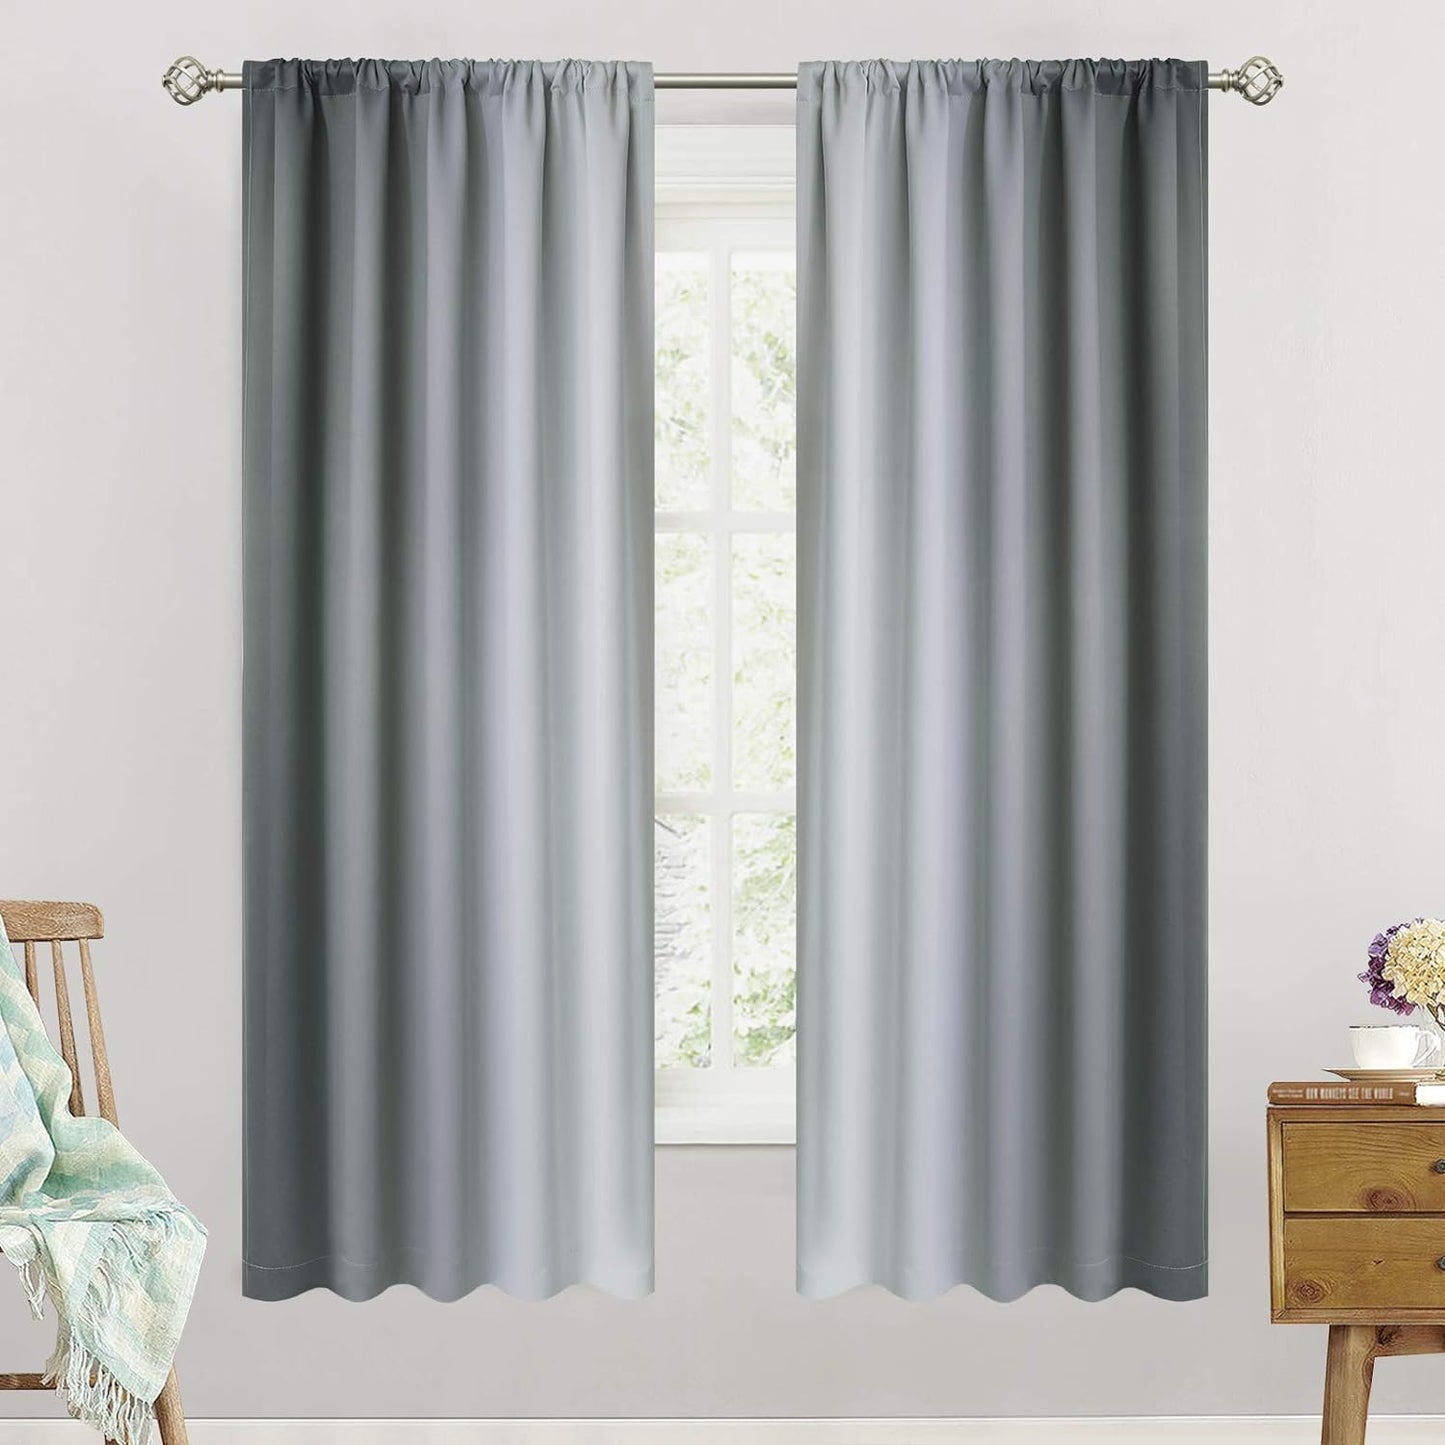 Simplehome Ombre Room Darkening Curtains for Bedroom, Light Blocking Gradient Purple to Greyish White Thermal Insulated Rod Pocket Window Curtains Drapes for Living Room,2 Panels, 52X84 Inches Length  SimpleHome Grey 52W X 63L / 2 Panels 